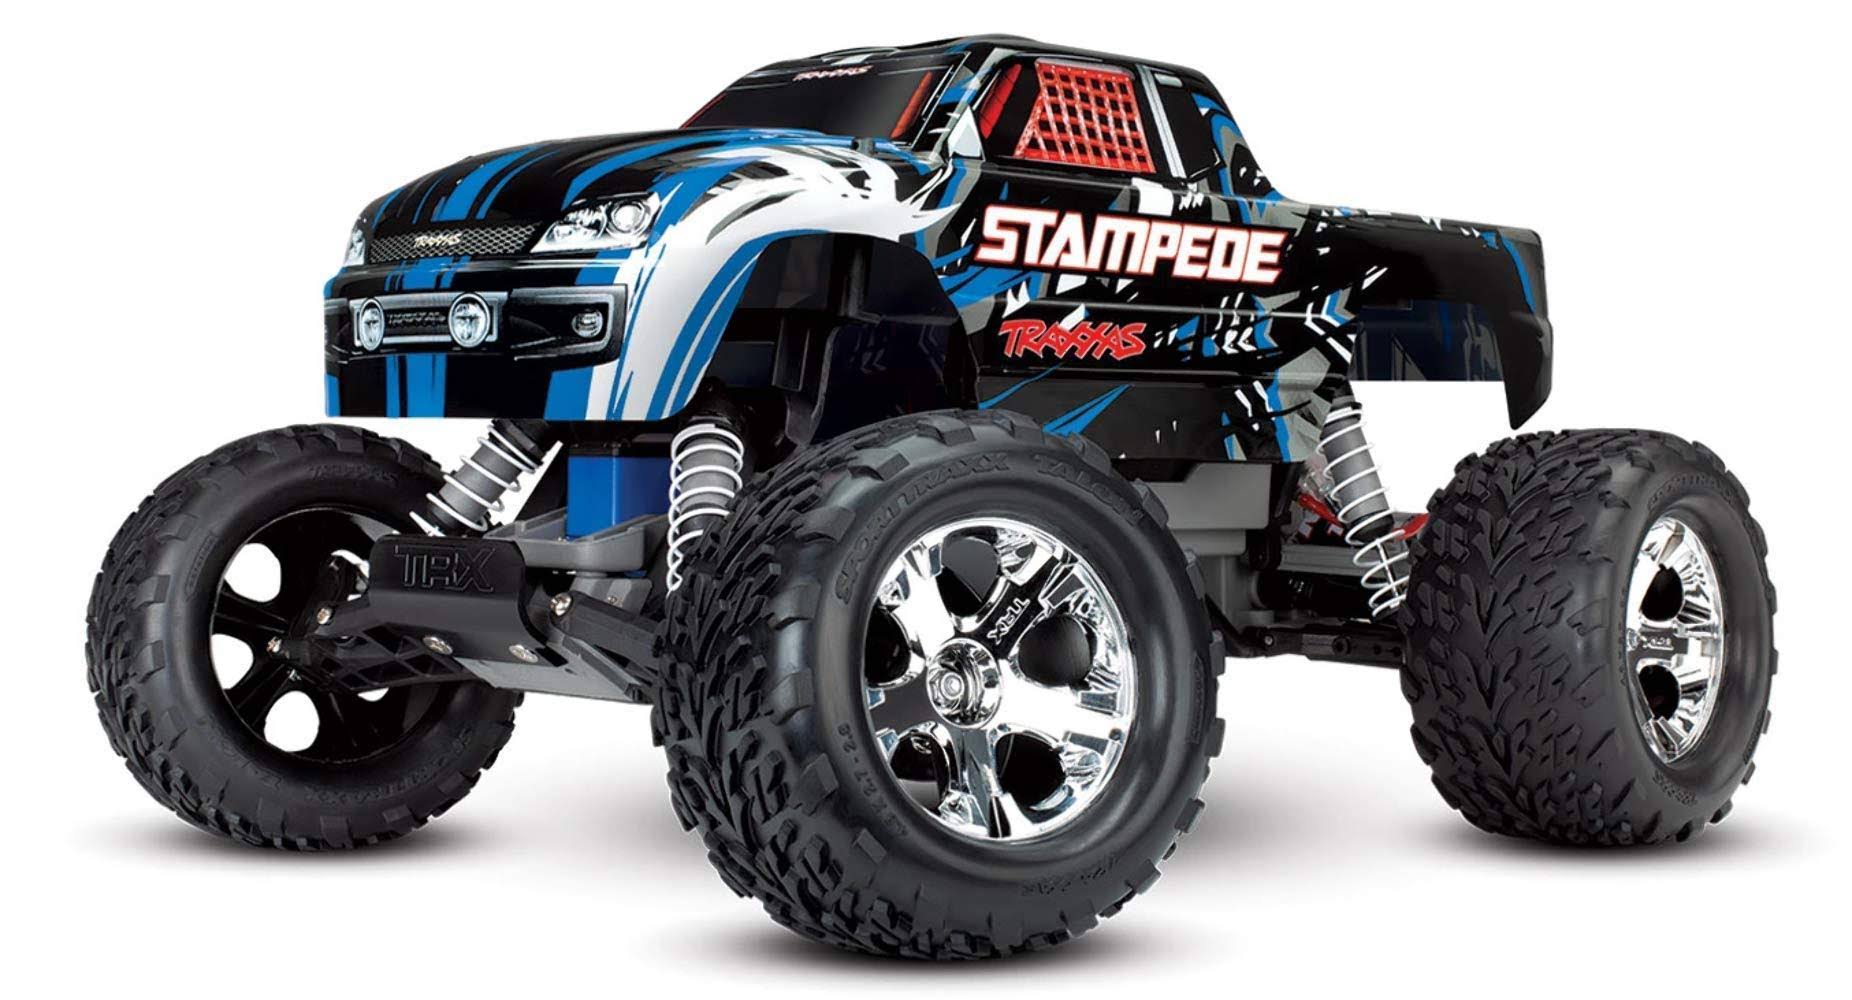 Traxxas Stampede 2WD Monster Truck 1:10 2.4GHz RTR (Blue)